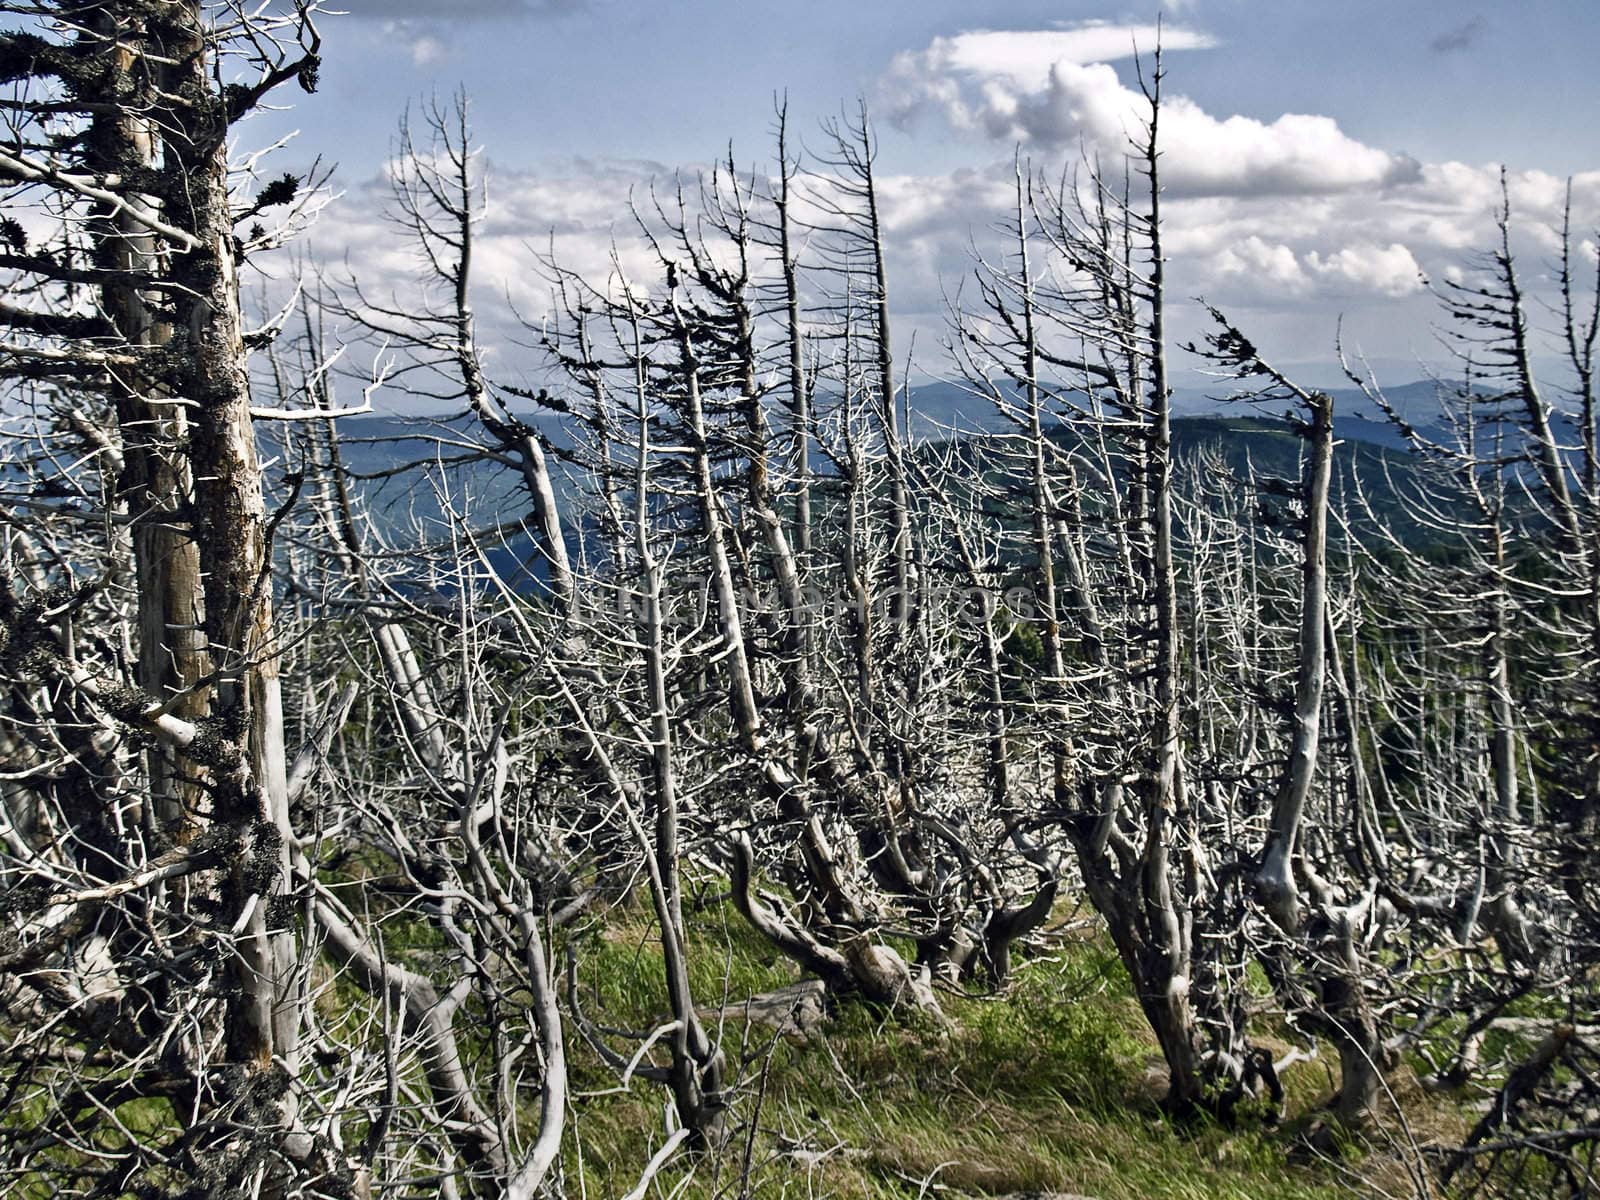 trees after fires and natural disasters